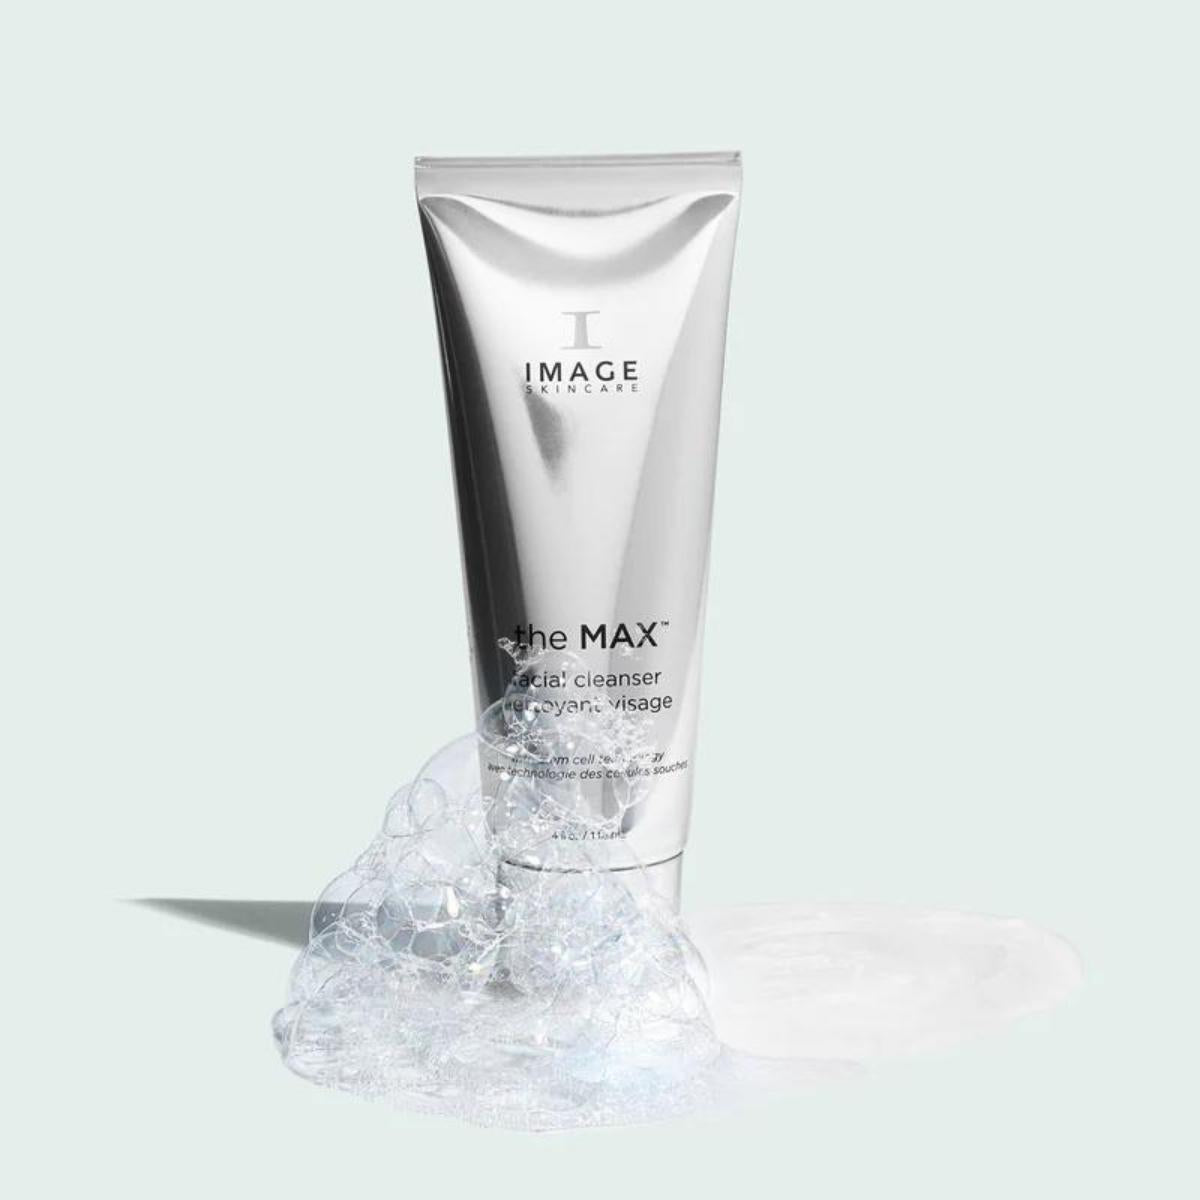 IMAGE Skincare The MAX Stem Cell Facial Cleanser